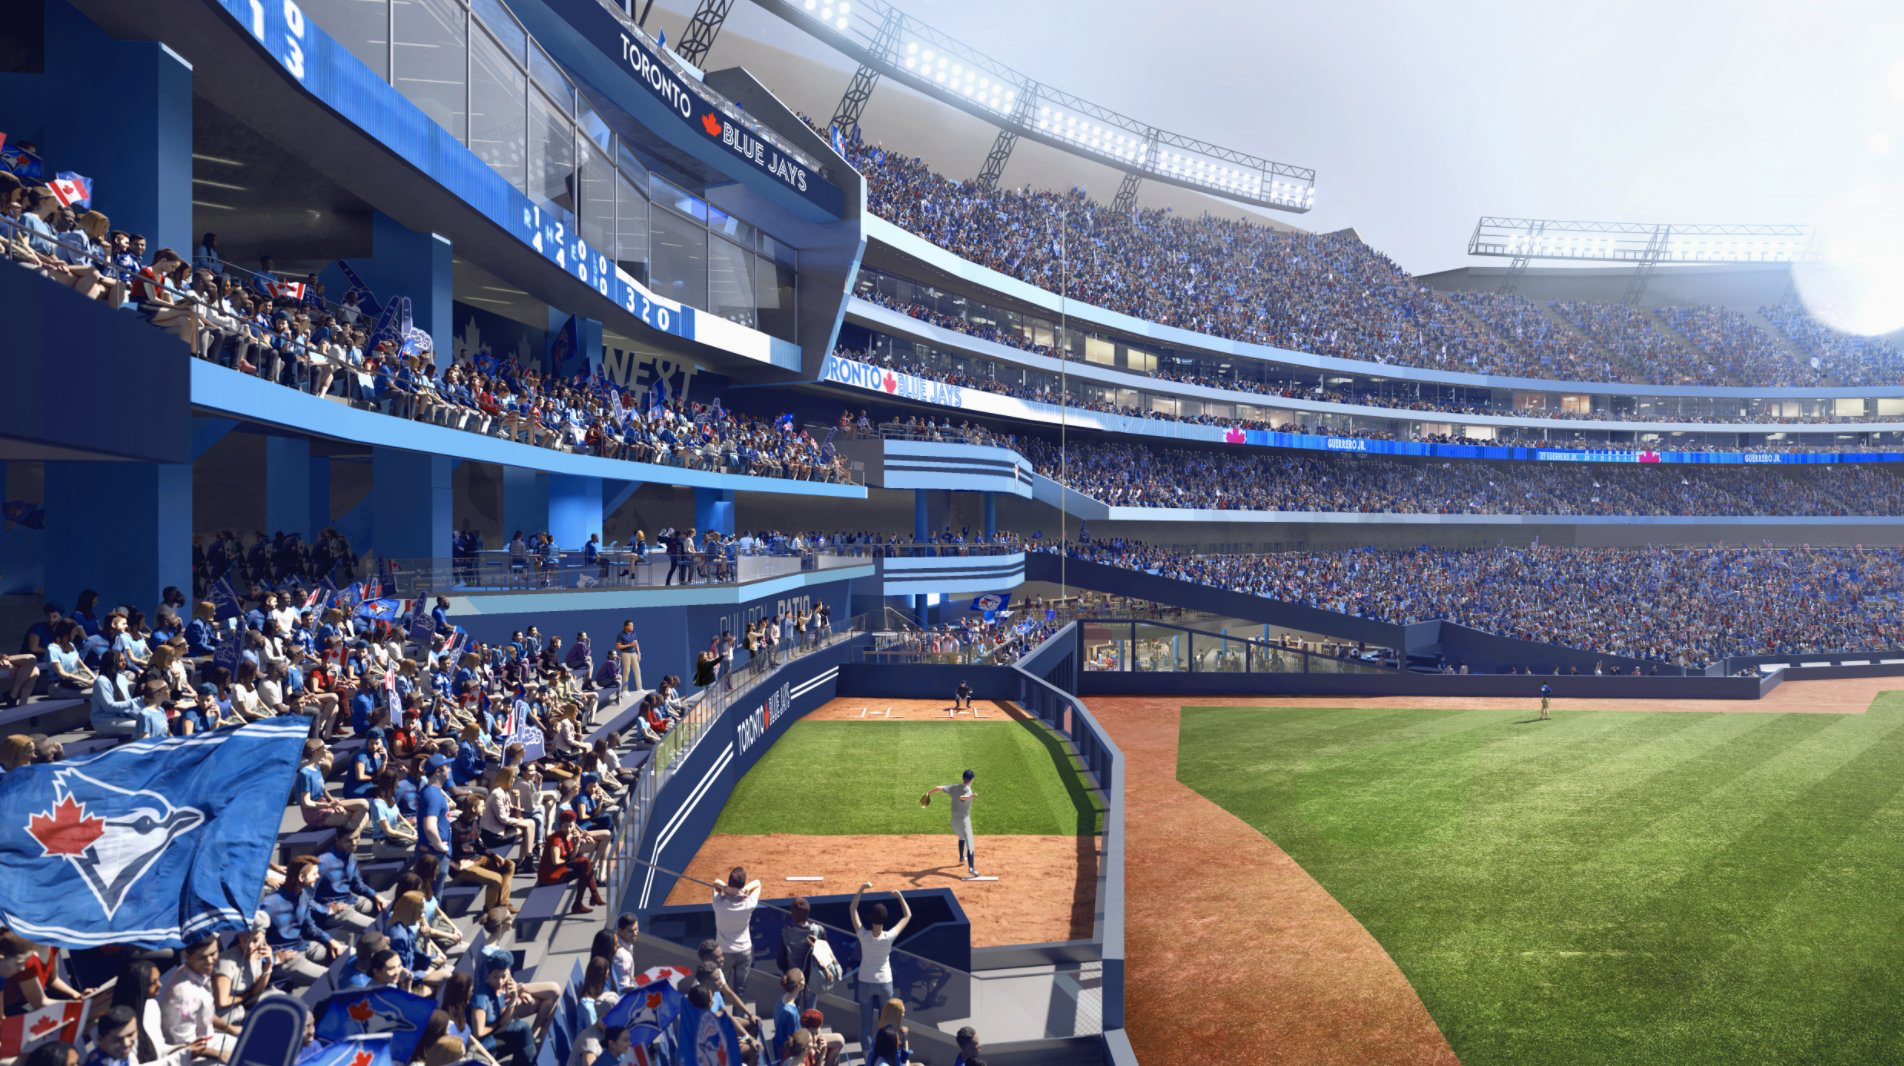 The Blue Jays could be getting a new stadium - Bleed Cubbie Blue